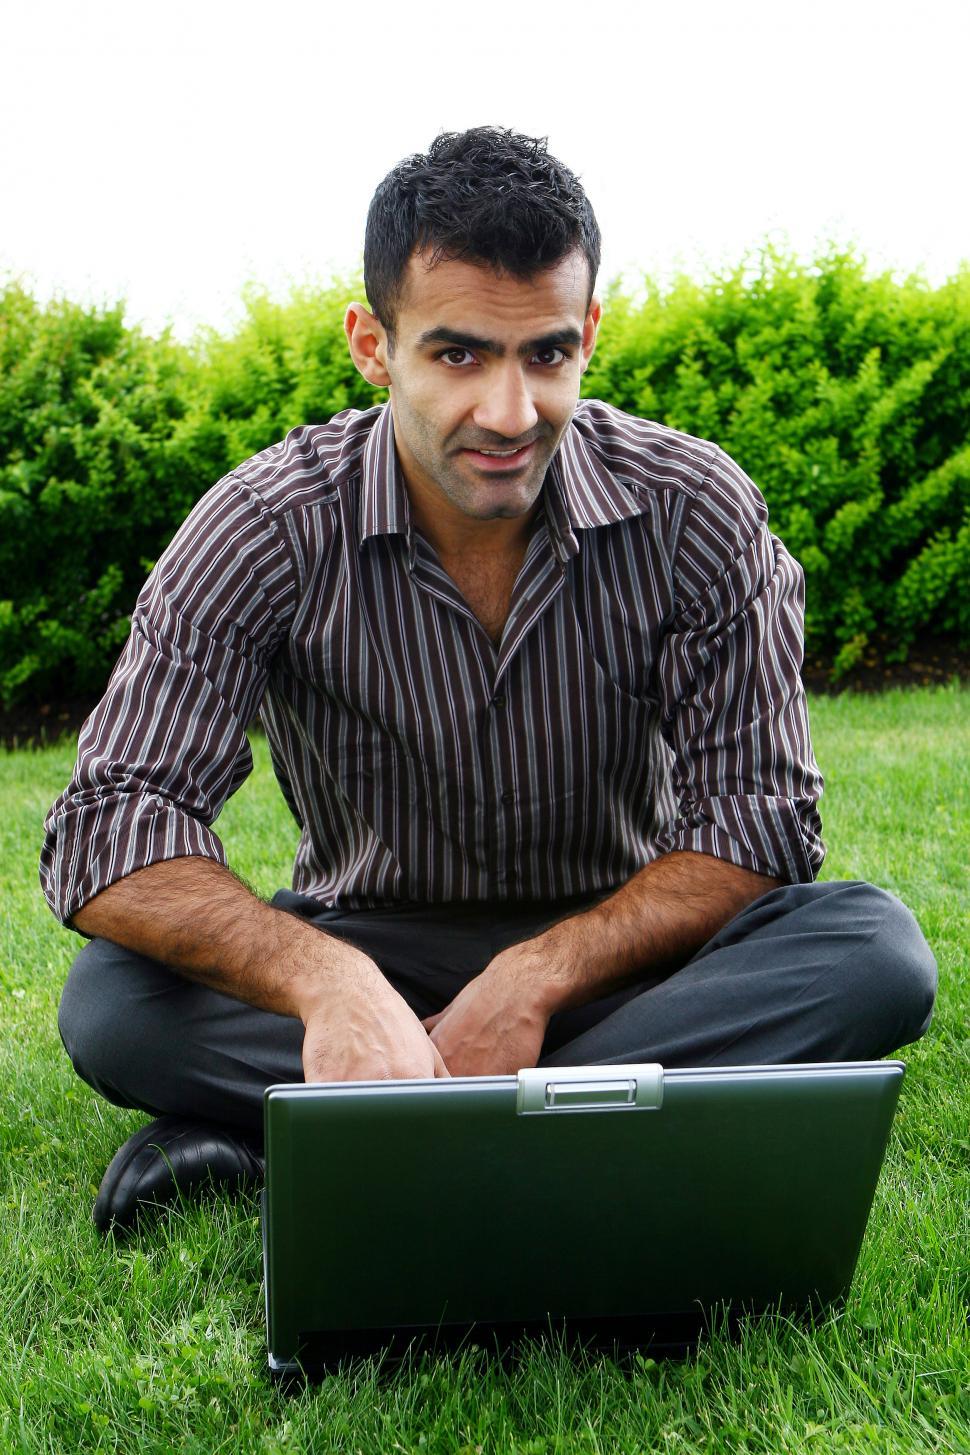 Free Image of Guy on the grass with a laptop 